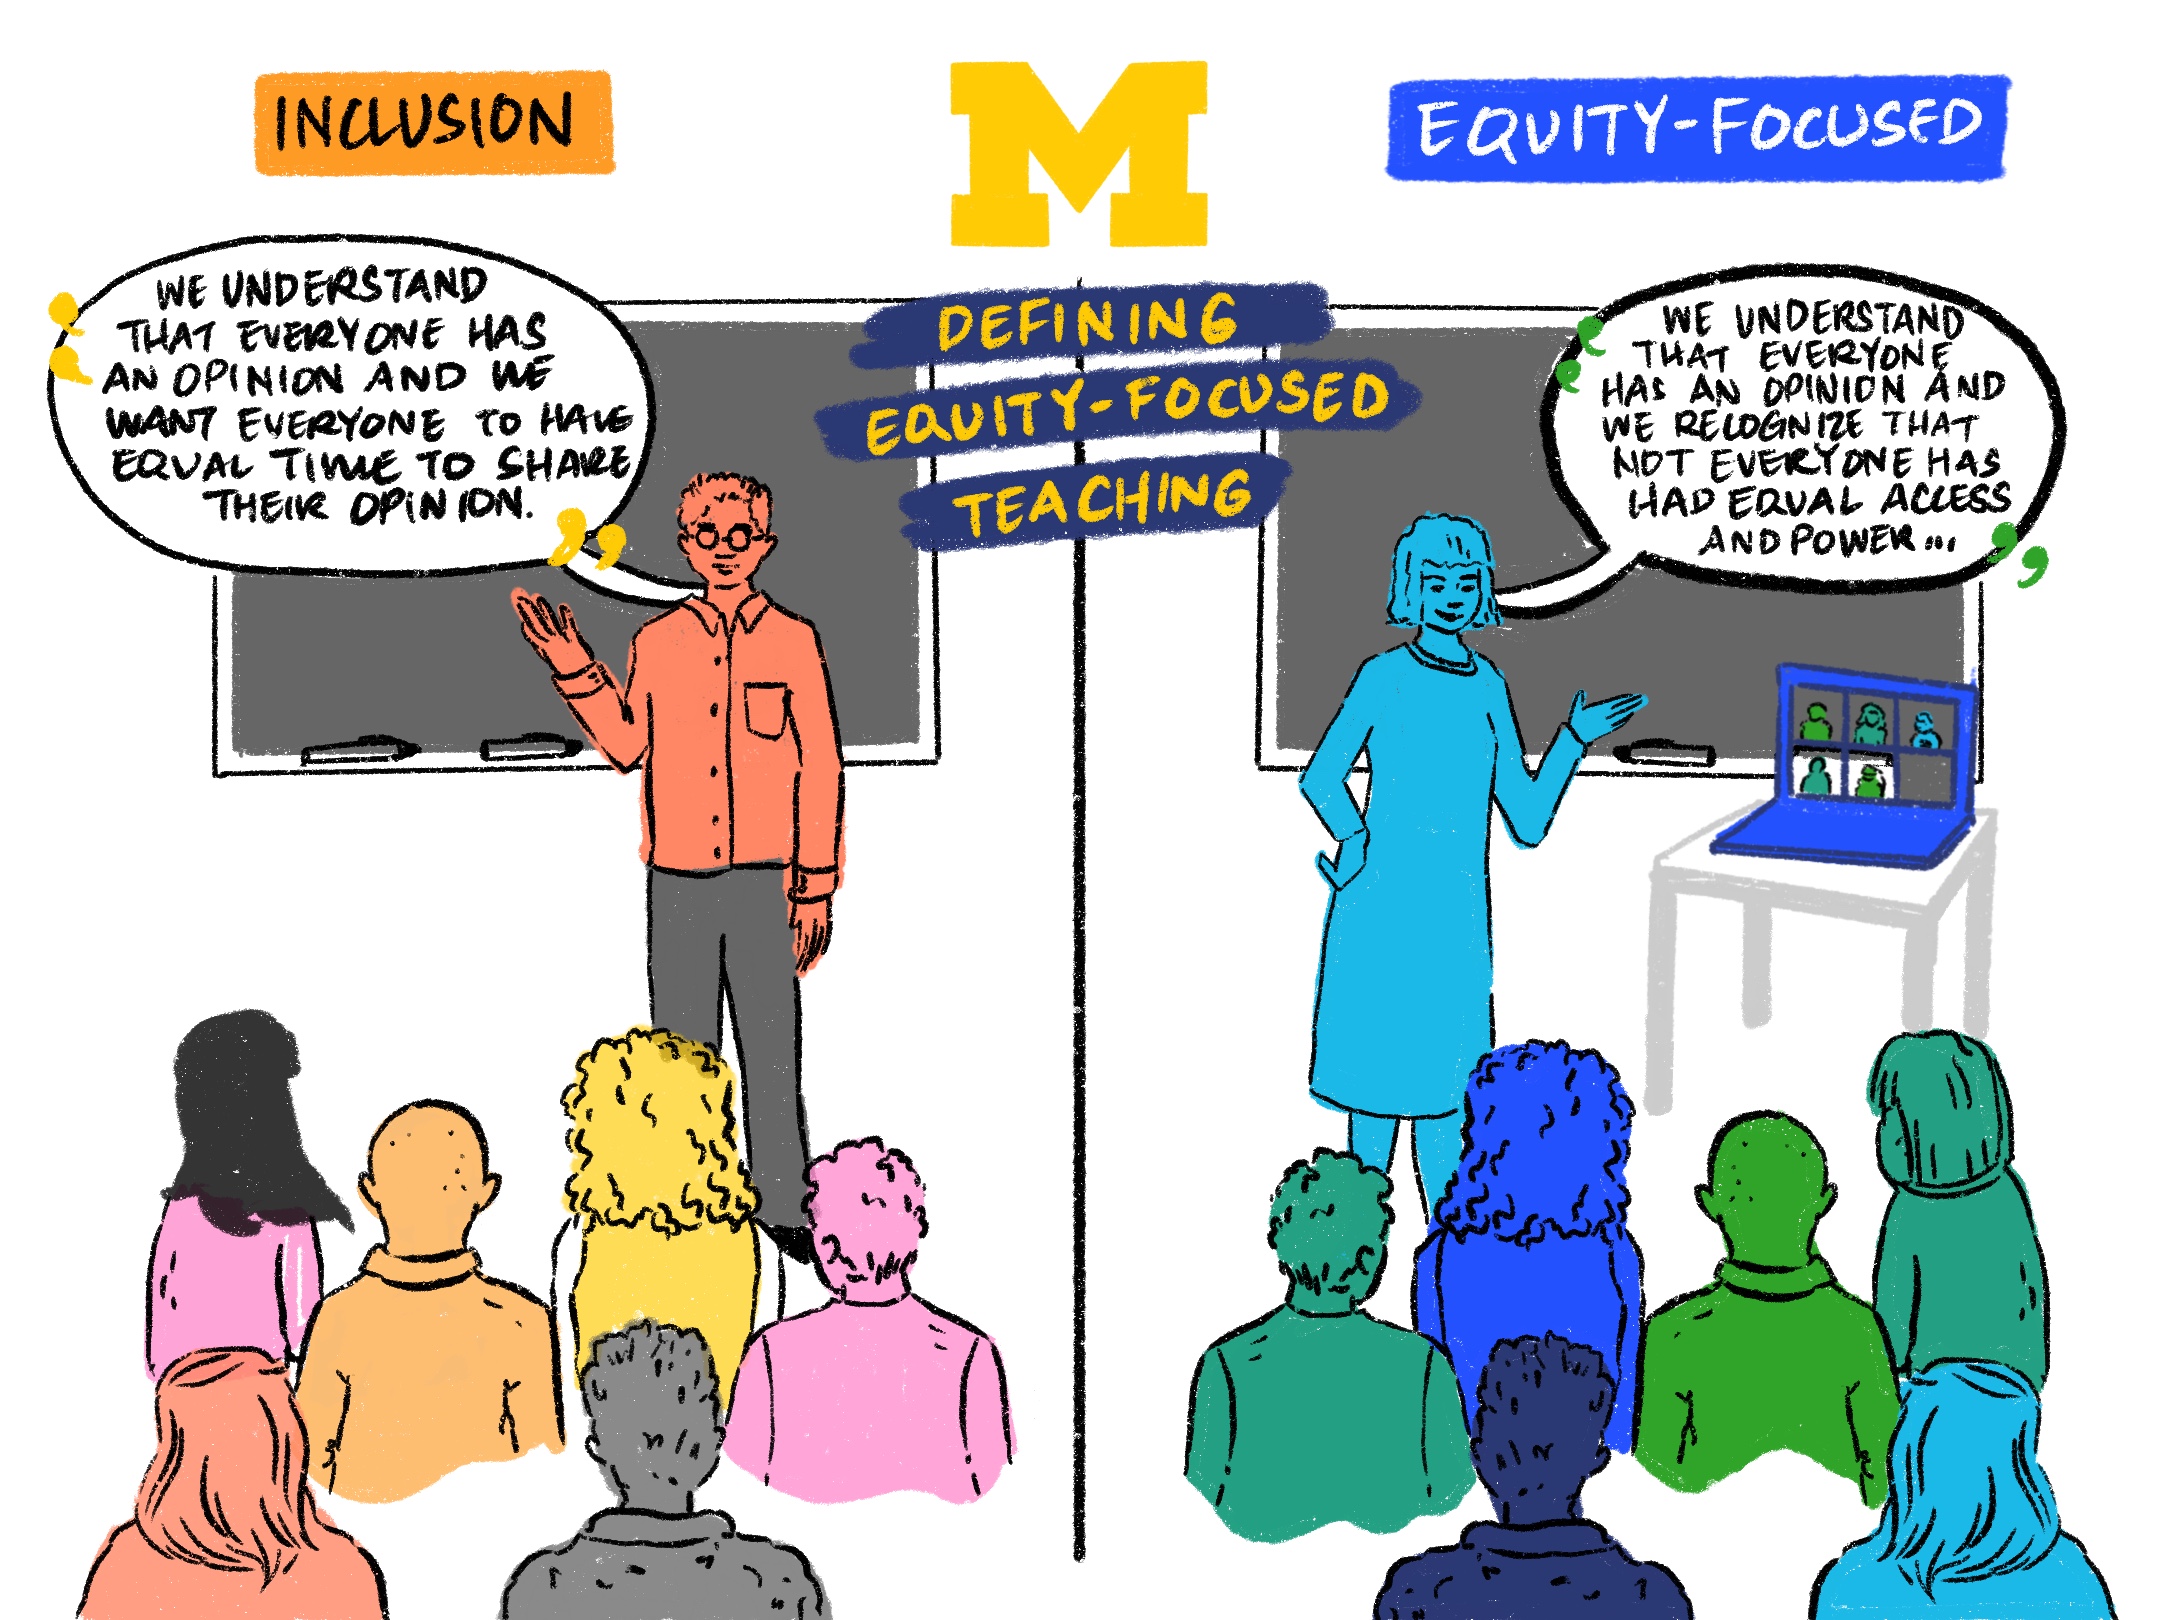 Defining Equity-focused Teaching: Inclusion "We understand that everyone has an opinion and we want everyone to have equal time to share their opinion" Equity-focused "We understand that everyone have an opinion and we recognize that not everyone has had equal access and power..."